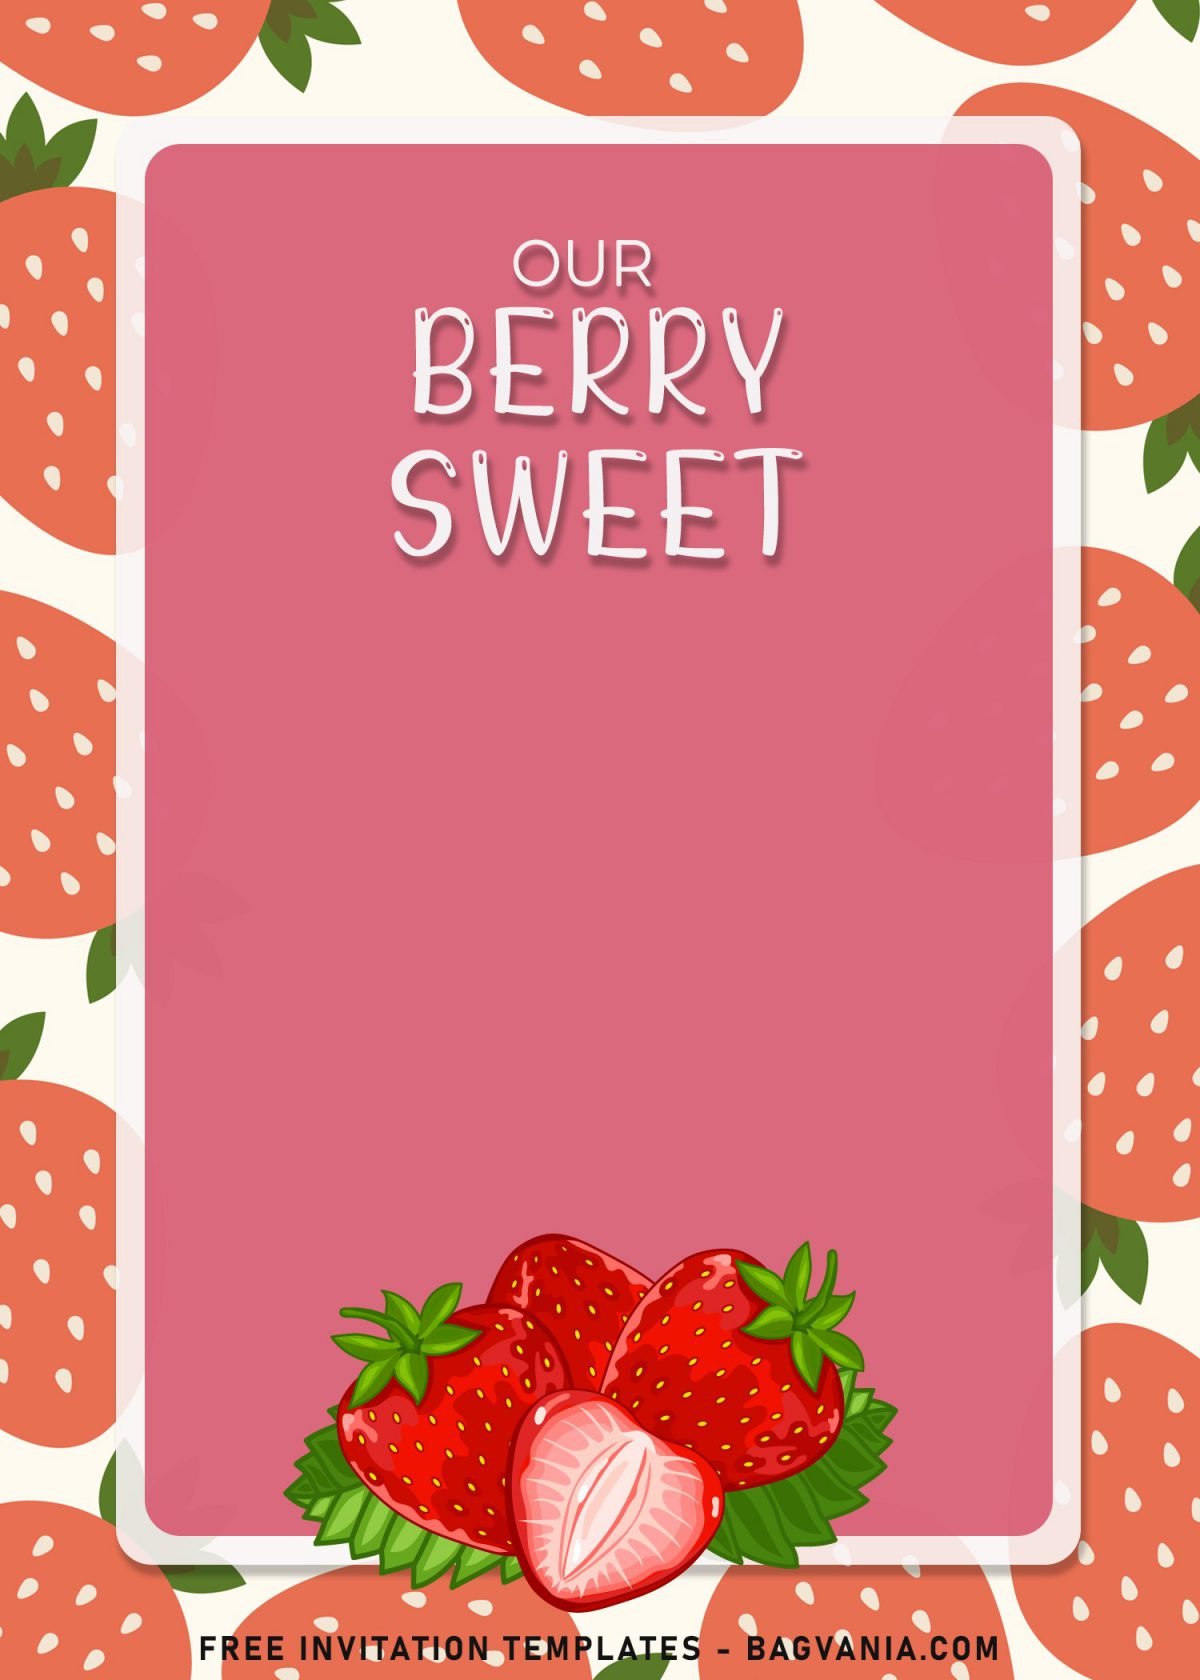 8+ Strawberry Birthday Invitation Templates For Girl Birthday Party and has strawberry background